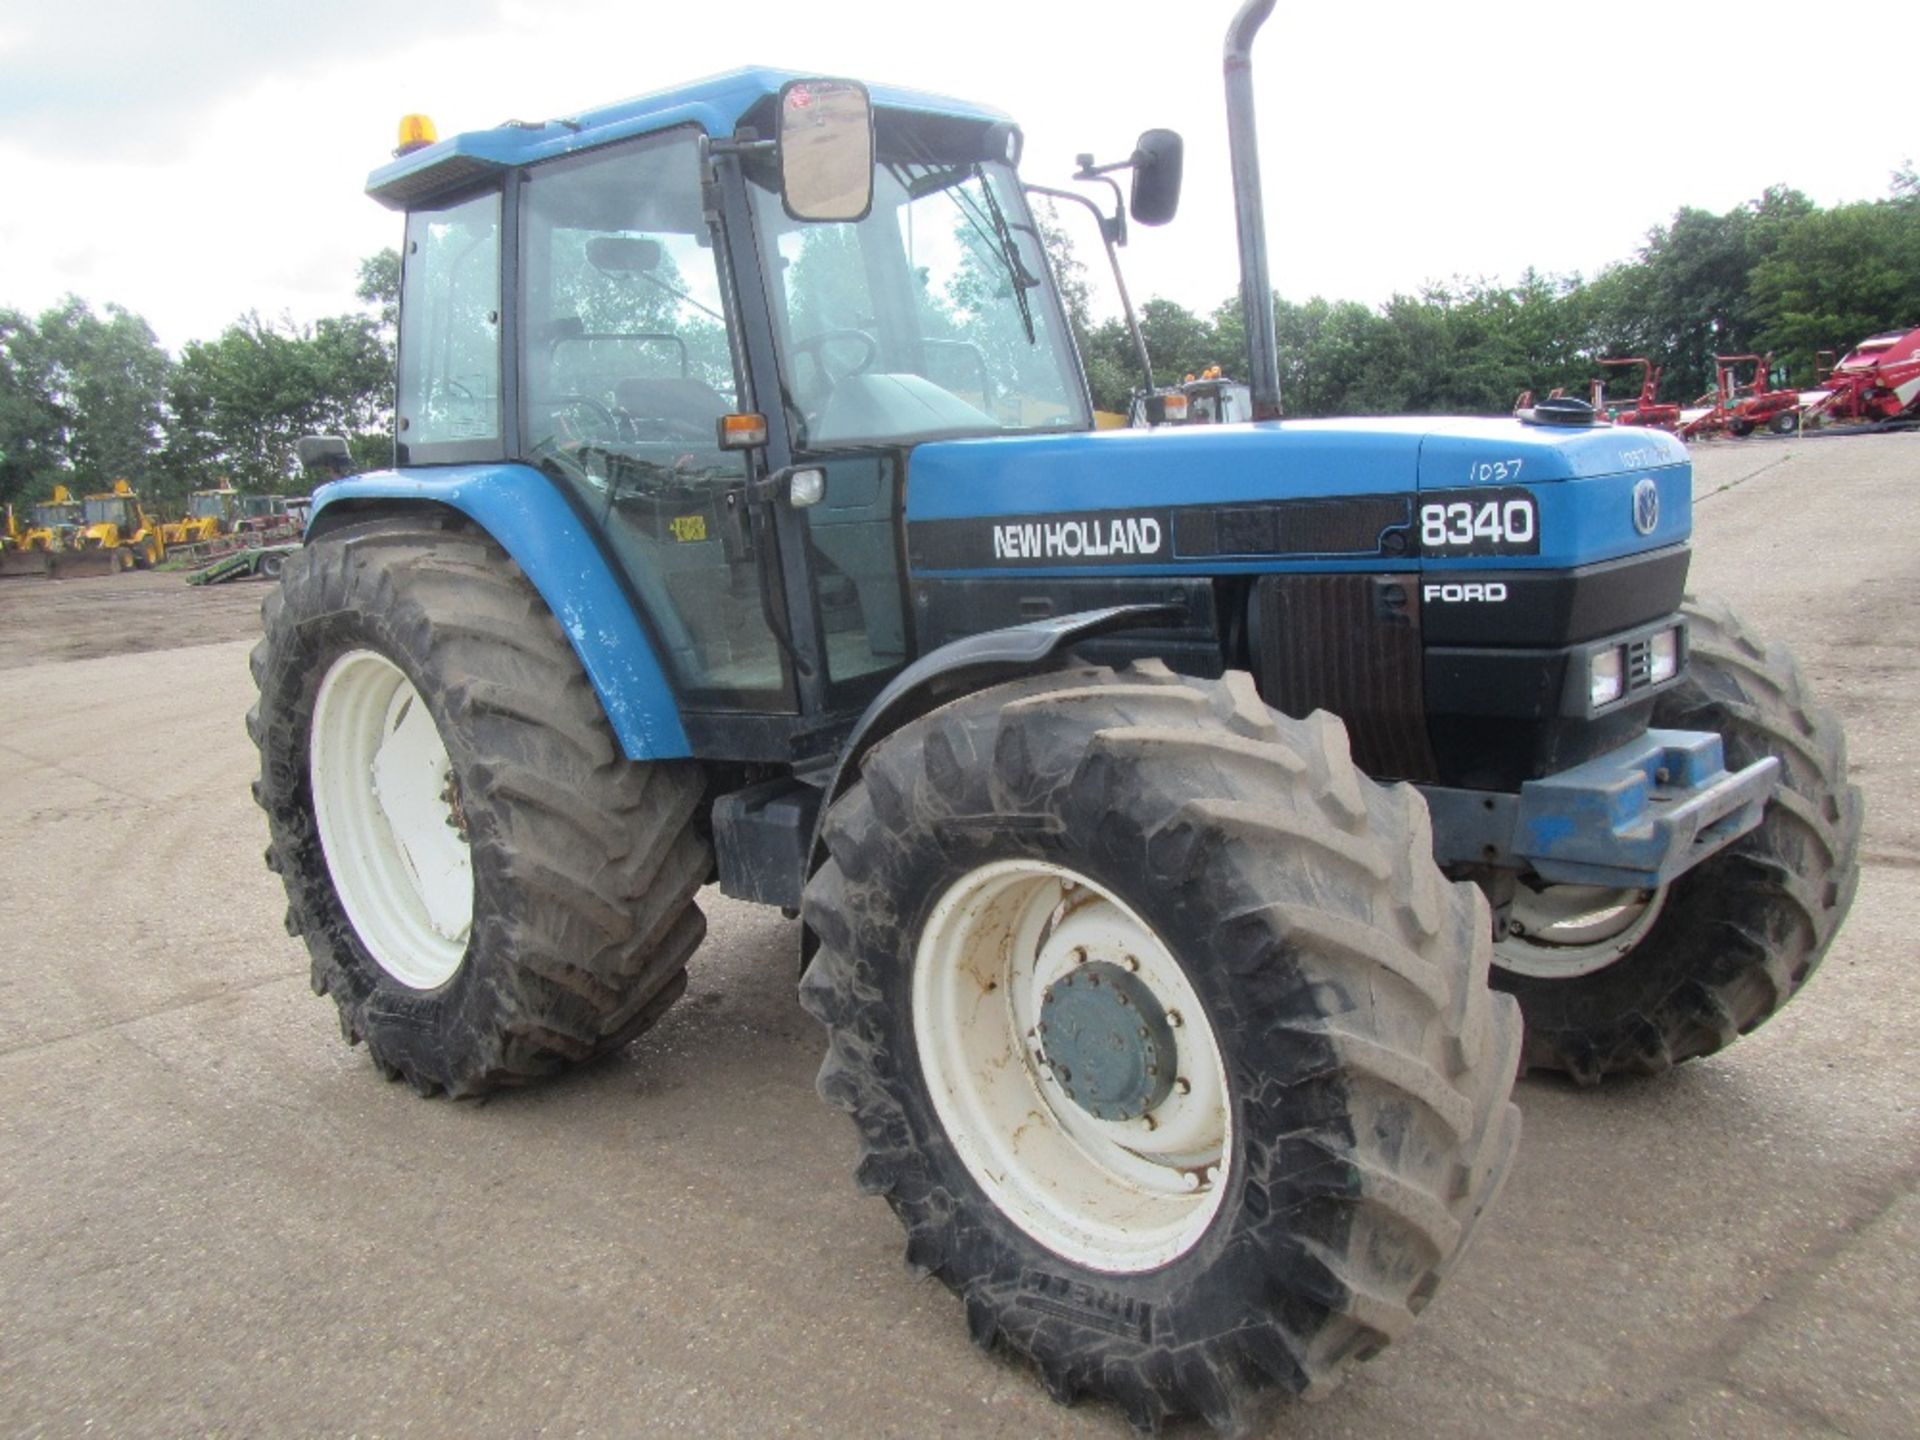 New Holland 8340 SLE 4wd Tractor. V5 will be supplied Reg. No. N243 SCN Ser No 025324B - Image 3 of 17